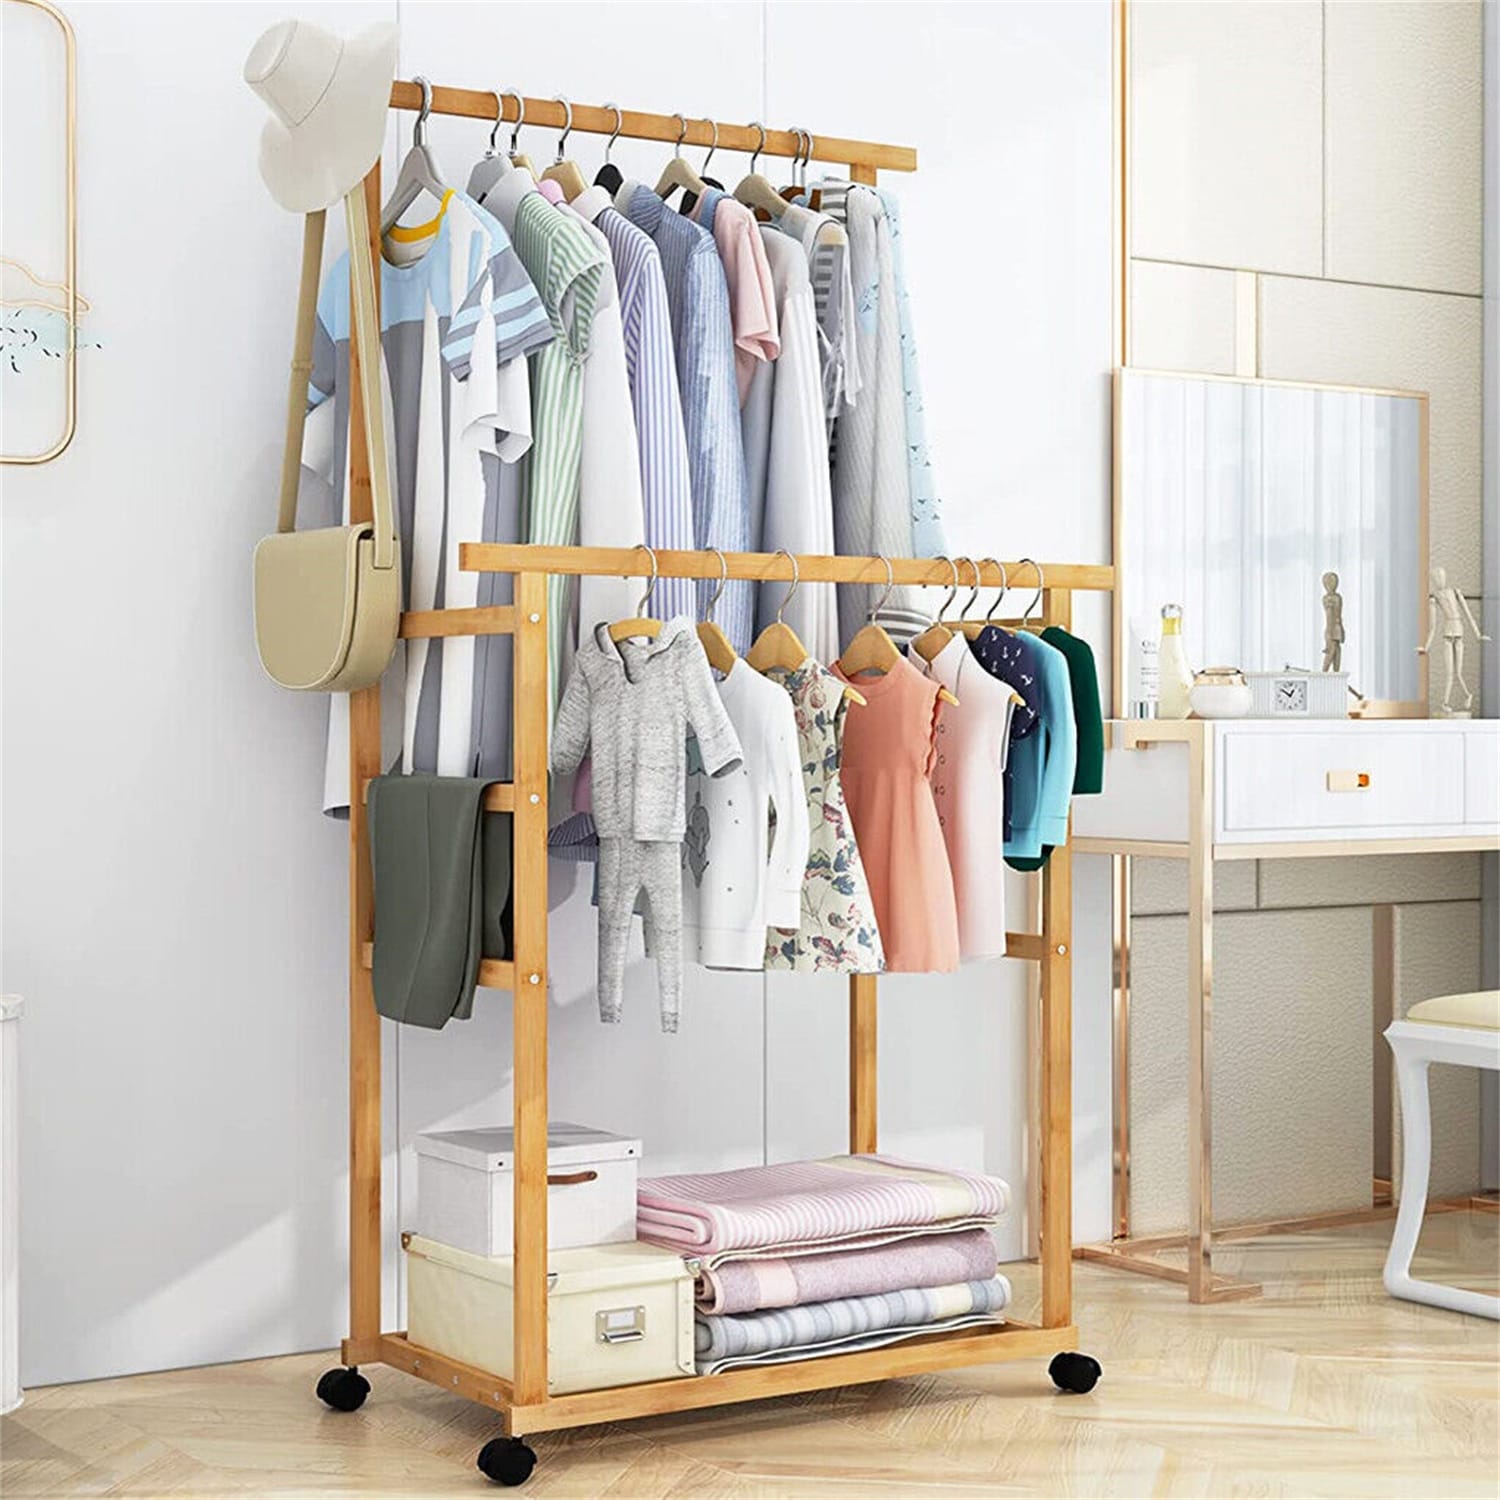 Portable Clothes Rack Coat Garment Stand Bamboo Rail Hanger Airer Closet -  Wood - Furniture > Home Furniture